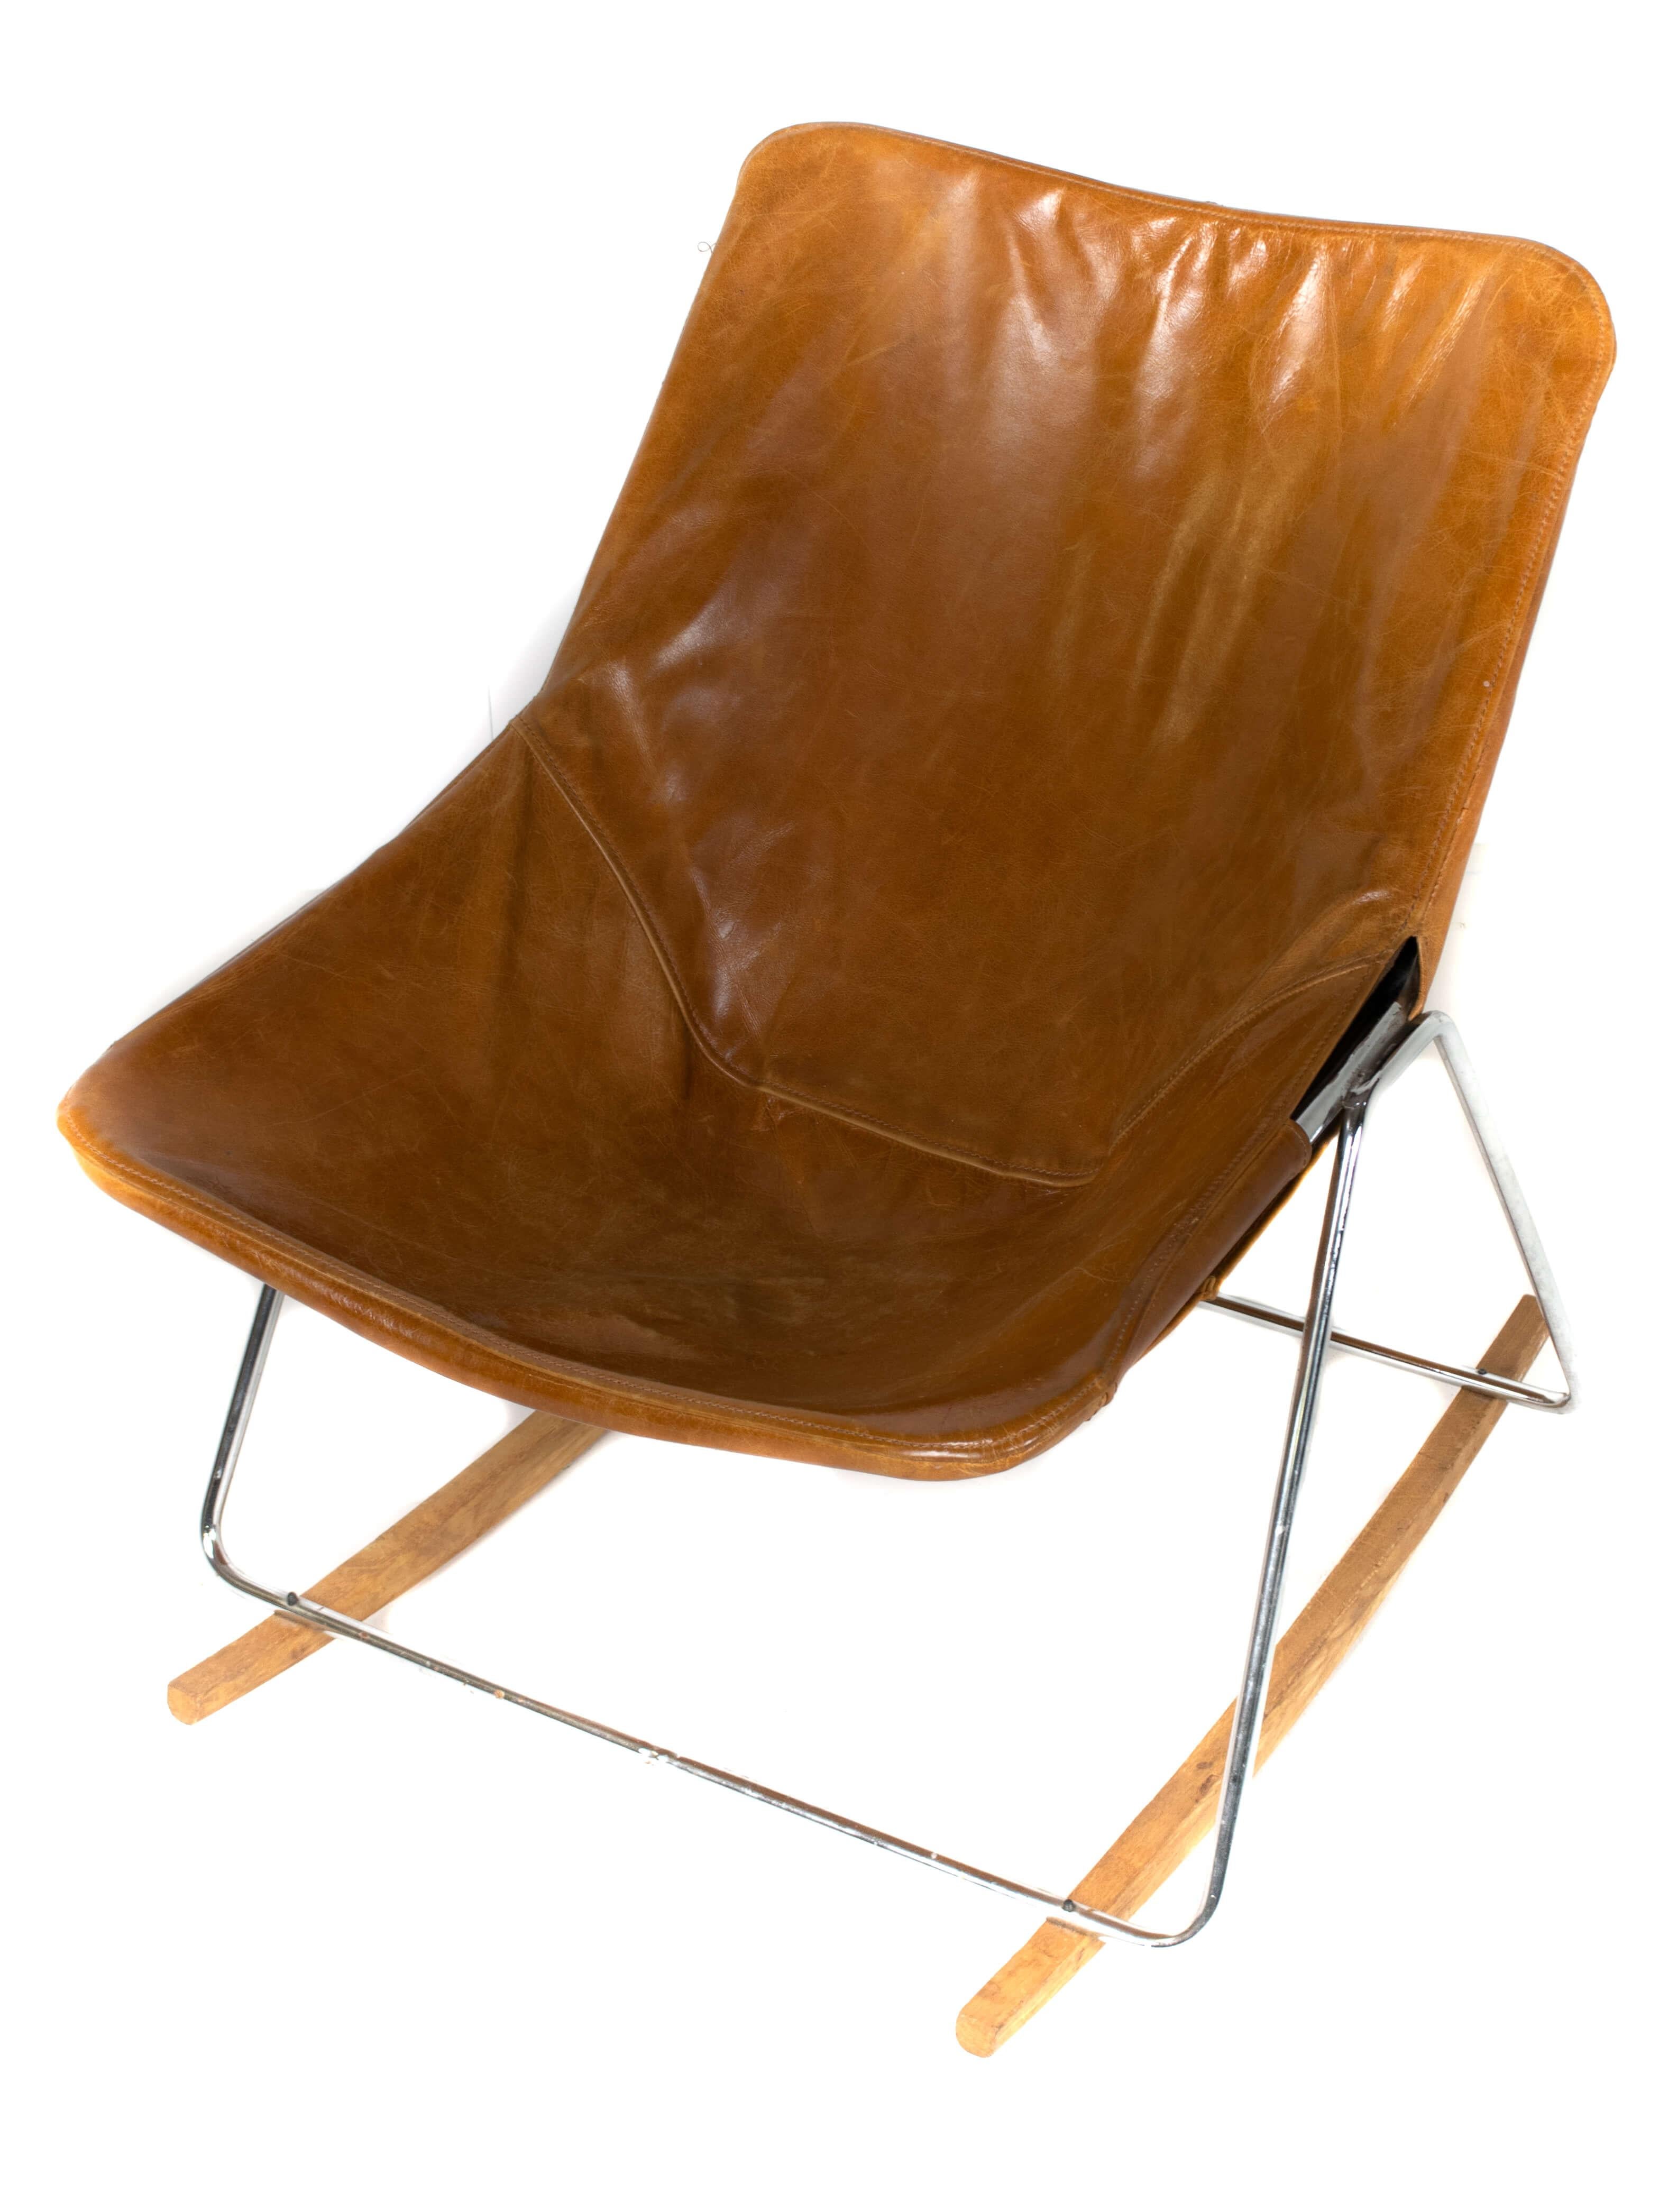 Steel G1 Leather Rocking Chair by Pierre Guariche, France